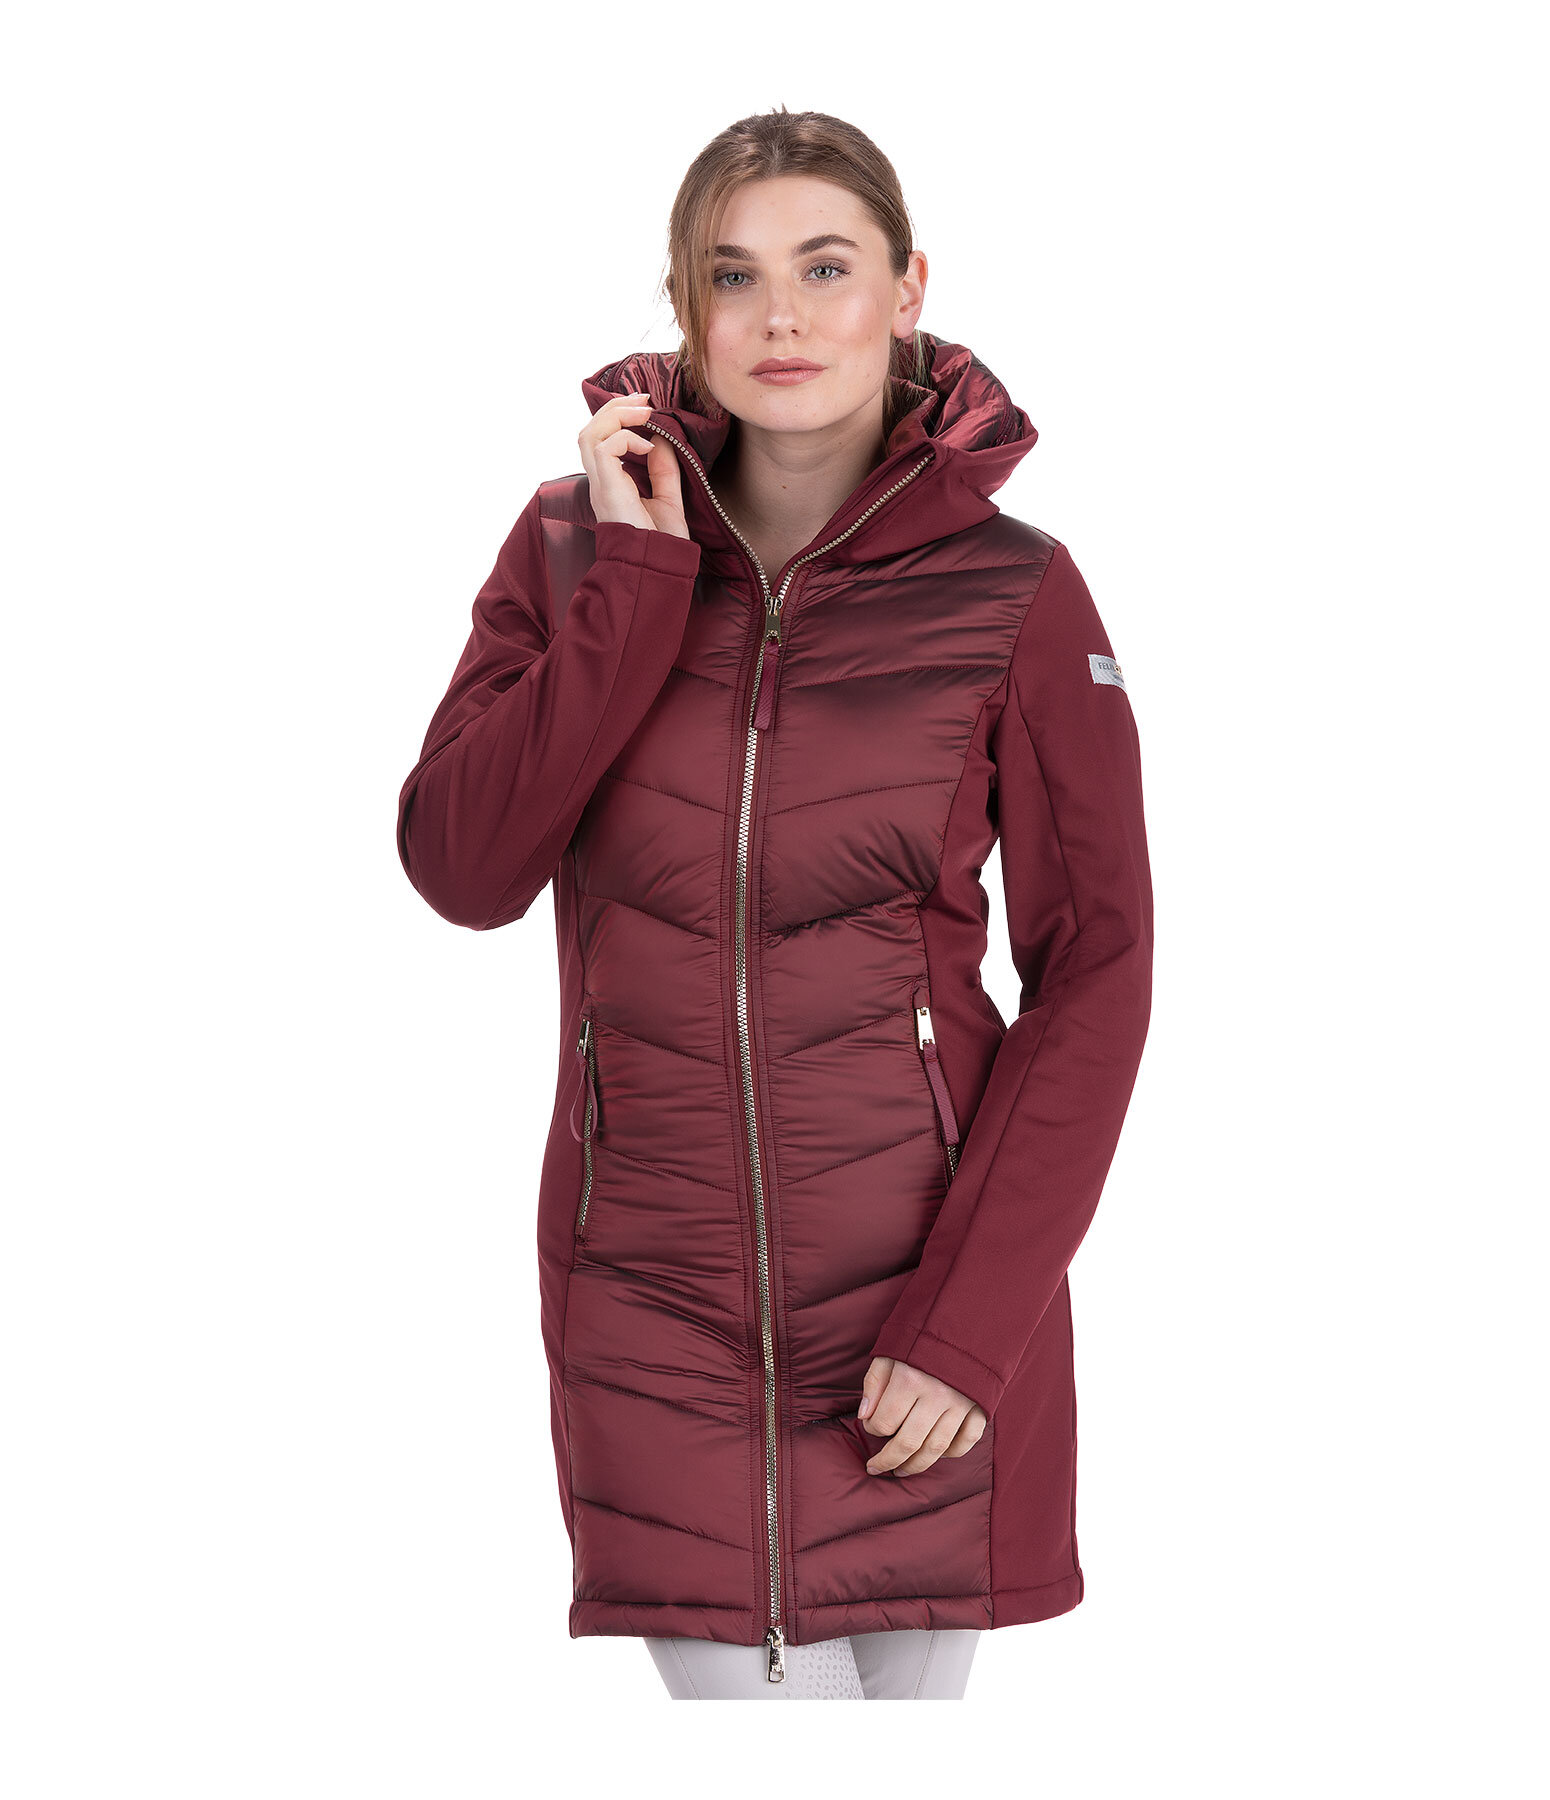 Soft Shell Hooded Combination Riding Coat Charlotte